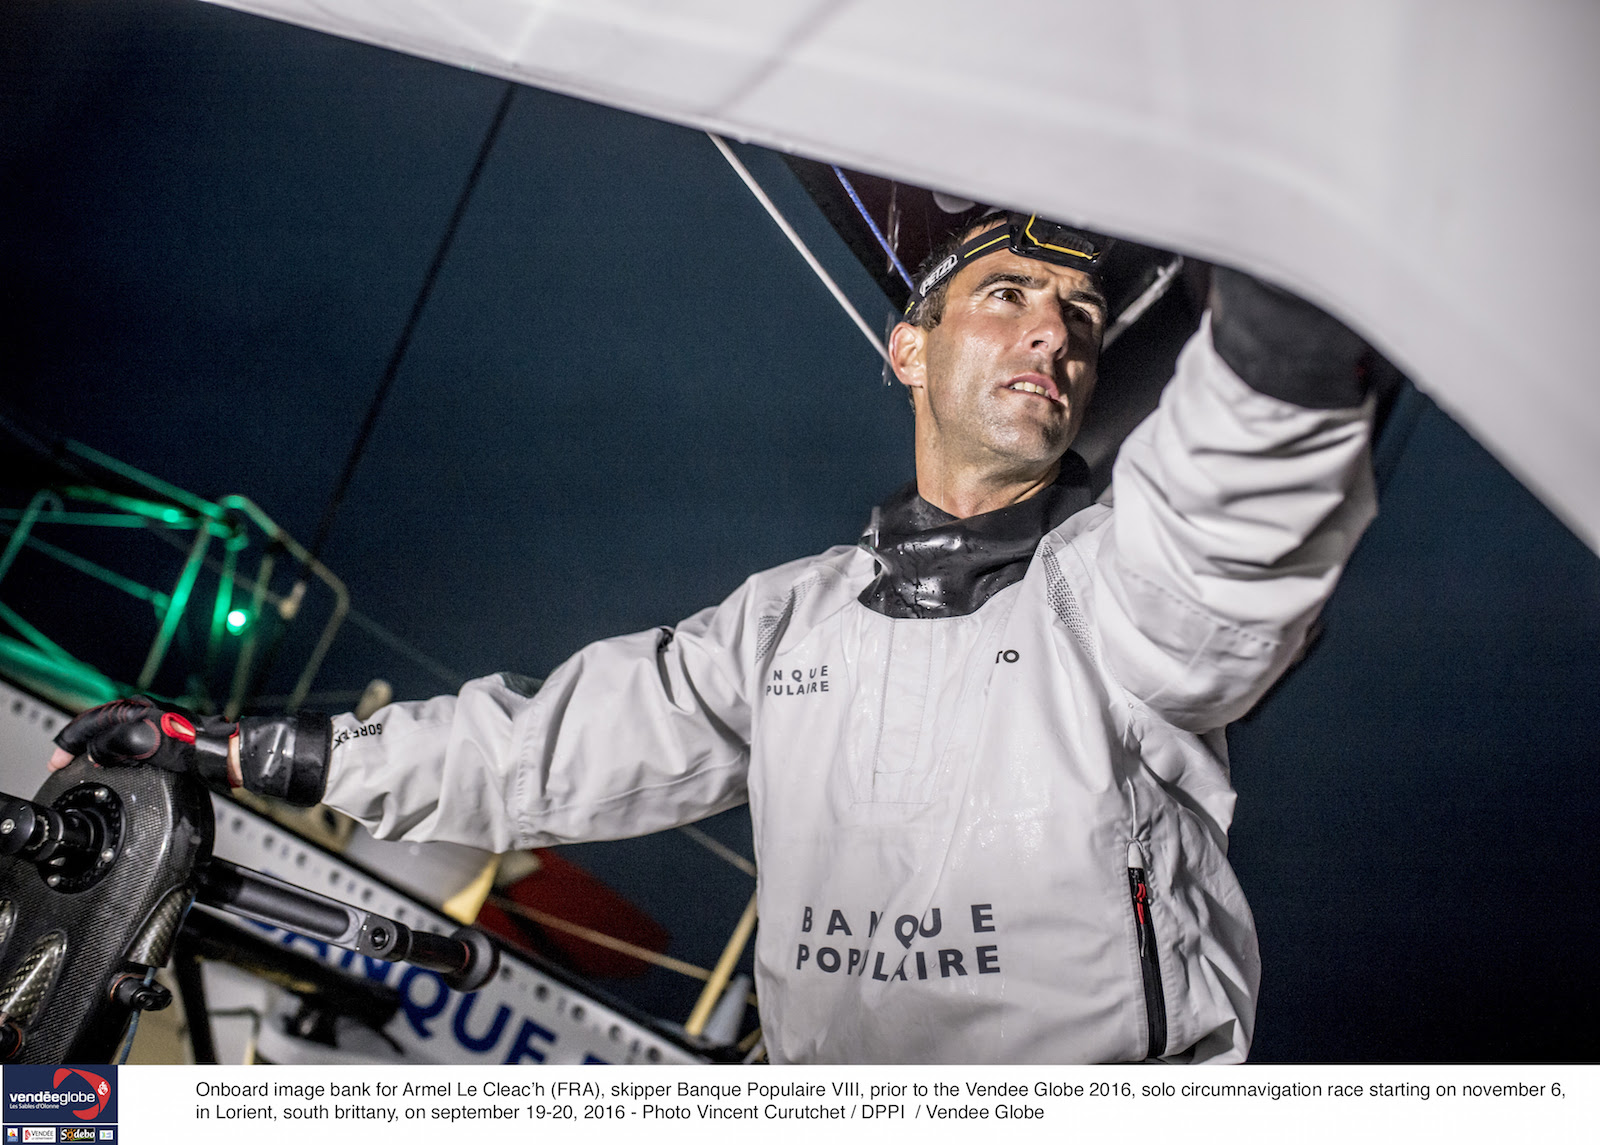 Onboard image bank for Armel Le Cleac'h (FRA), skipper Banque Populaire VIII, prior to the Vendee Globe 2016, solo circumnavigation race starting on november 6, in Lorient, south brittany, on september 19-20, 2016 - Photo Vincent Curutchet / DPPI / Vendee Globe